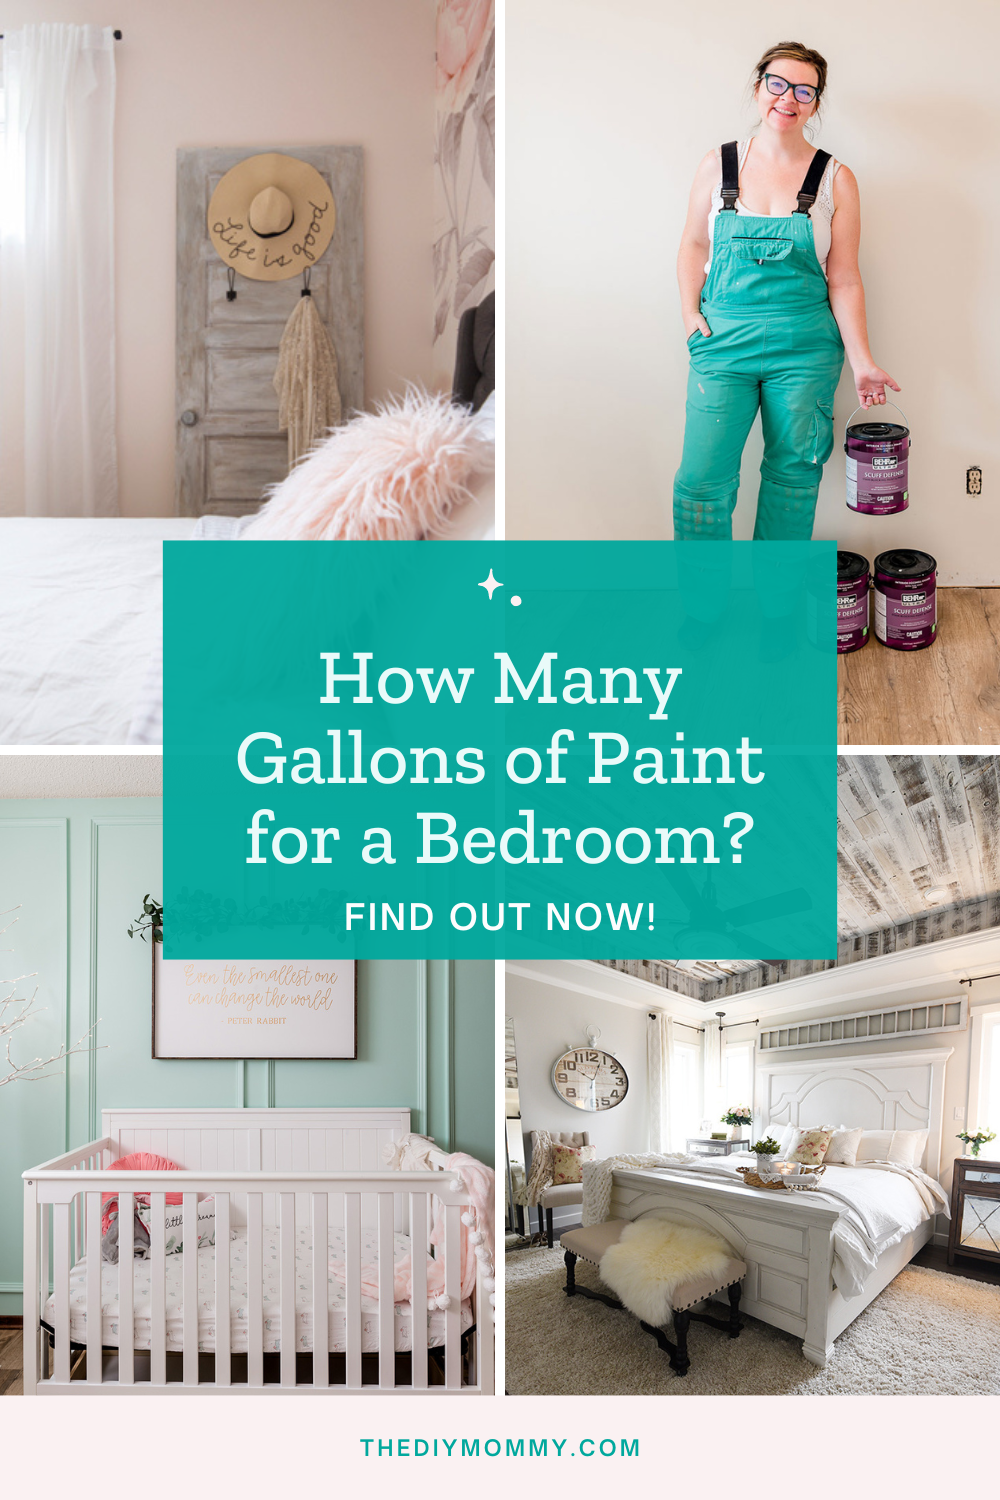 3 images of painted bedrooms and one with a woman standing with a gallon of paint. 